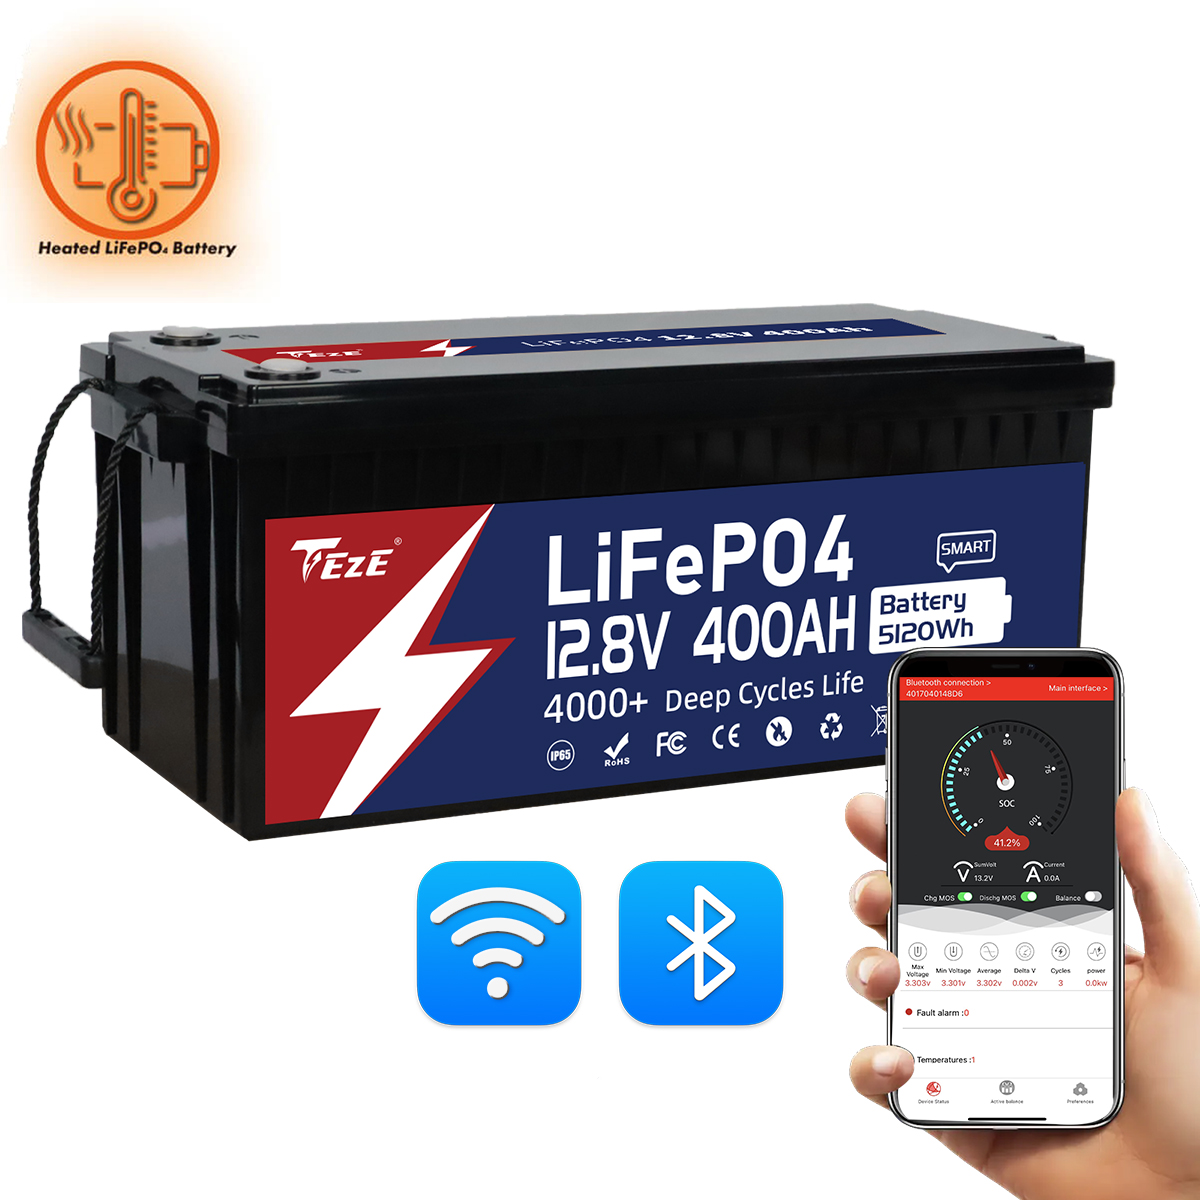 New Add WiFi-TezePower 12V 400Ah LiFePO4 Battery with WIFI and Bluetooth, Self-heating and Active Balancer, Built-in 250A Daly BMS(WIFI Built-in Version)